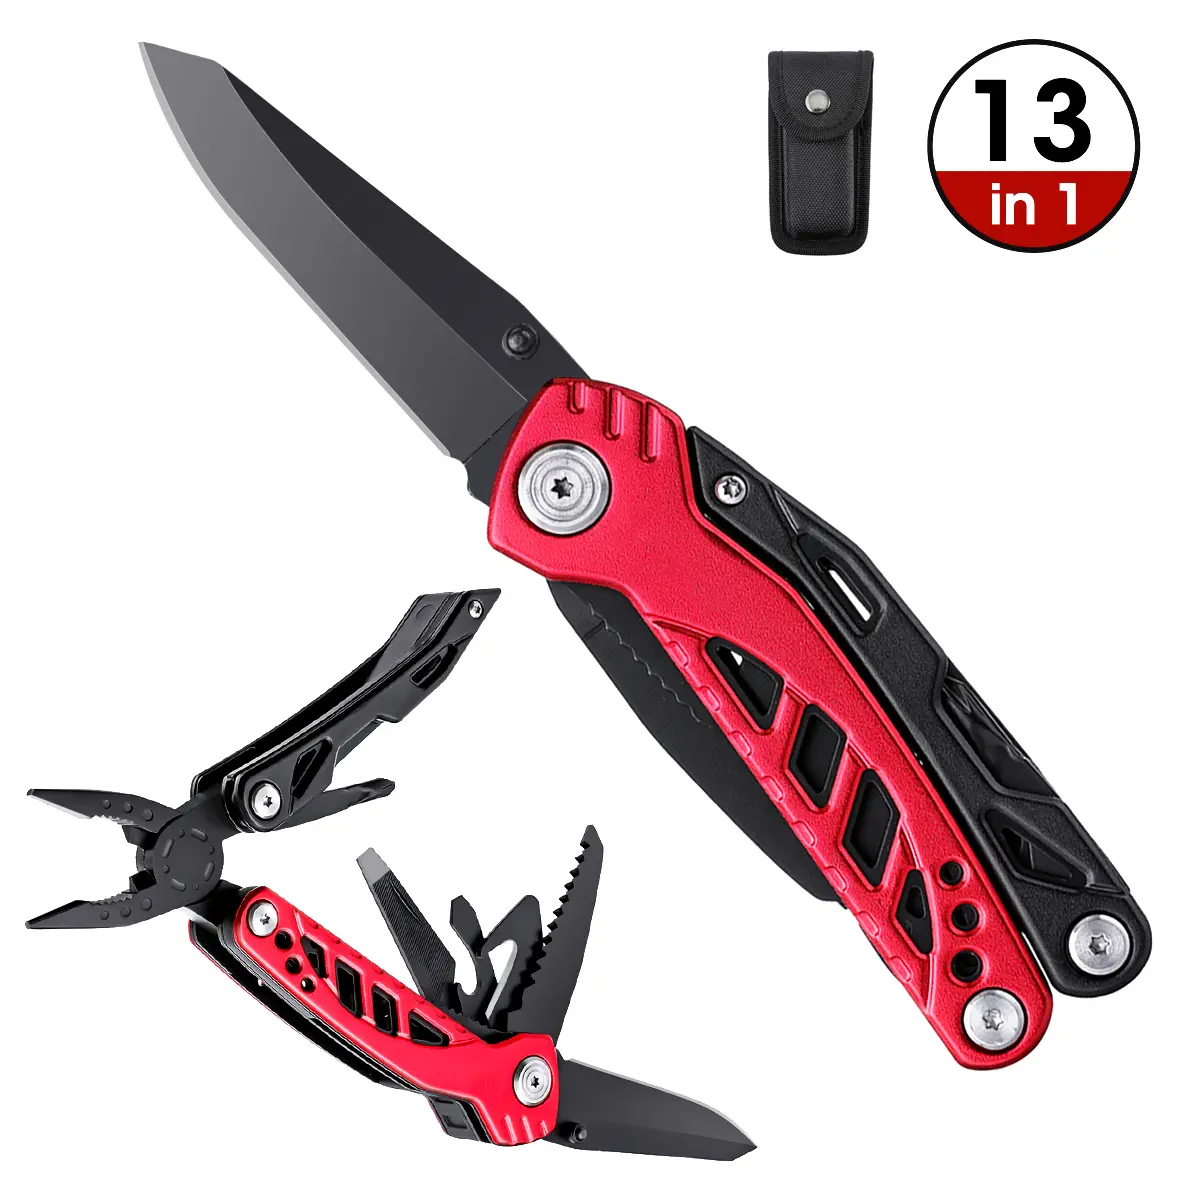 HUOHOU GHK-23A 10 in 1 Multi-function Claw Hammers Pliers Folding Cutter Sawtooth Bottle Opener Screwdriver Scale Saw Home Improvement Tools from Xiaomi Youpin